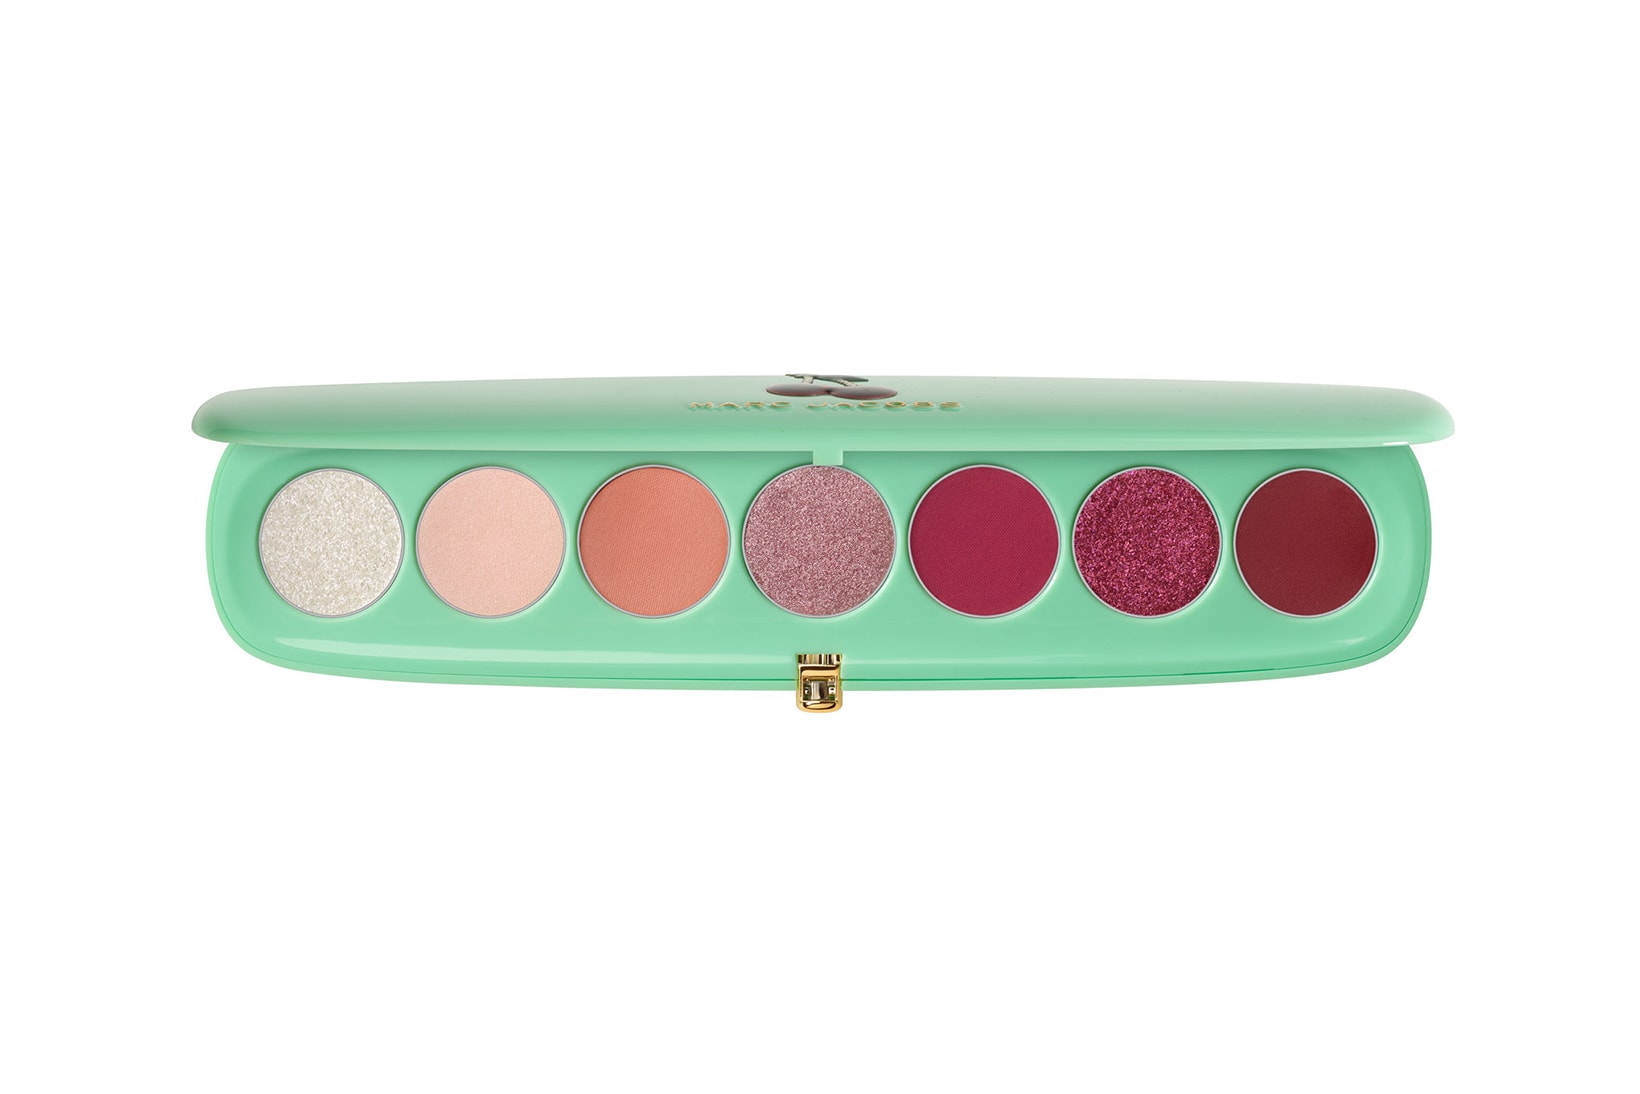 Marc Jacobs Beauty Holiday 2020 Very Merry Cherry Makeup Collection Highlighter Eyeshadow Palette